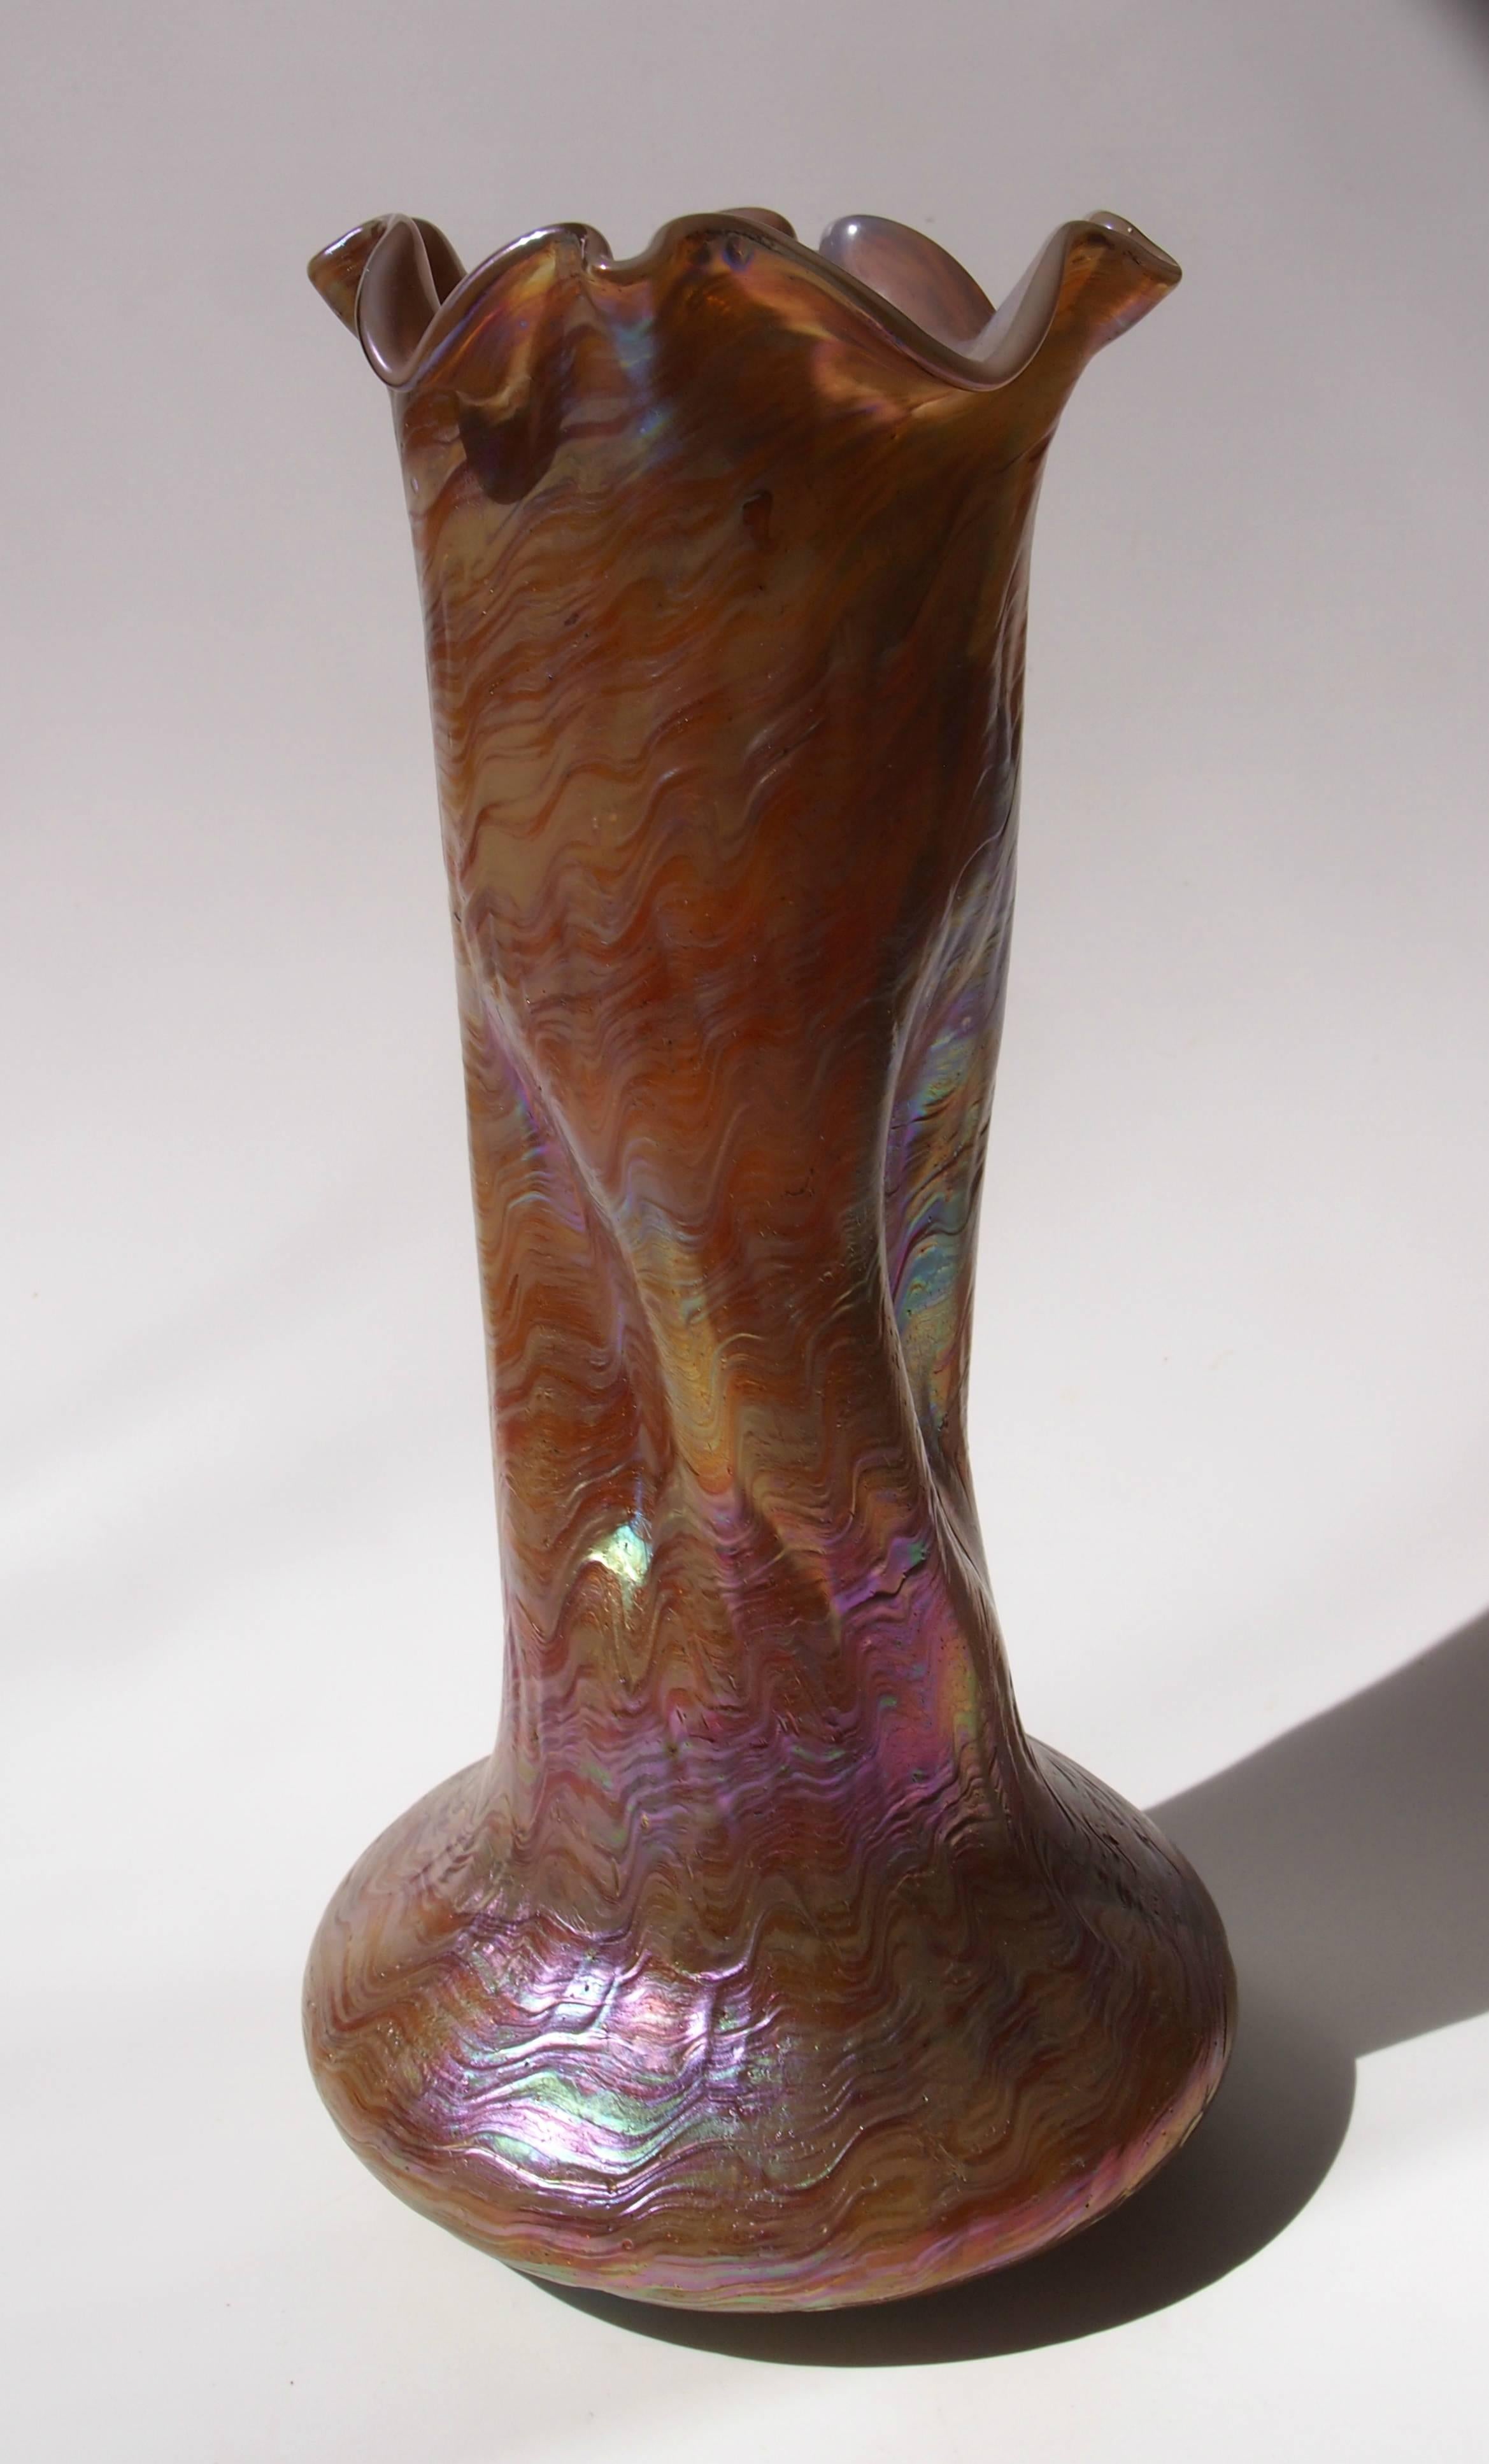 Impressive Art Nouveau Rindskopf iridized brown on cream opal base vase with impressed dimples and hand tooled top. The glass vase is a great period shape and an exceptional color.

Rindskopf was one of the great Bohemian iridized glass makers at